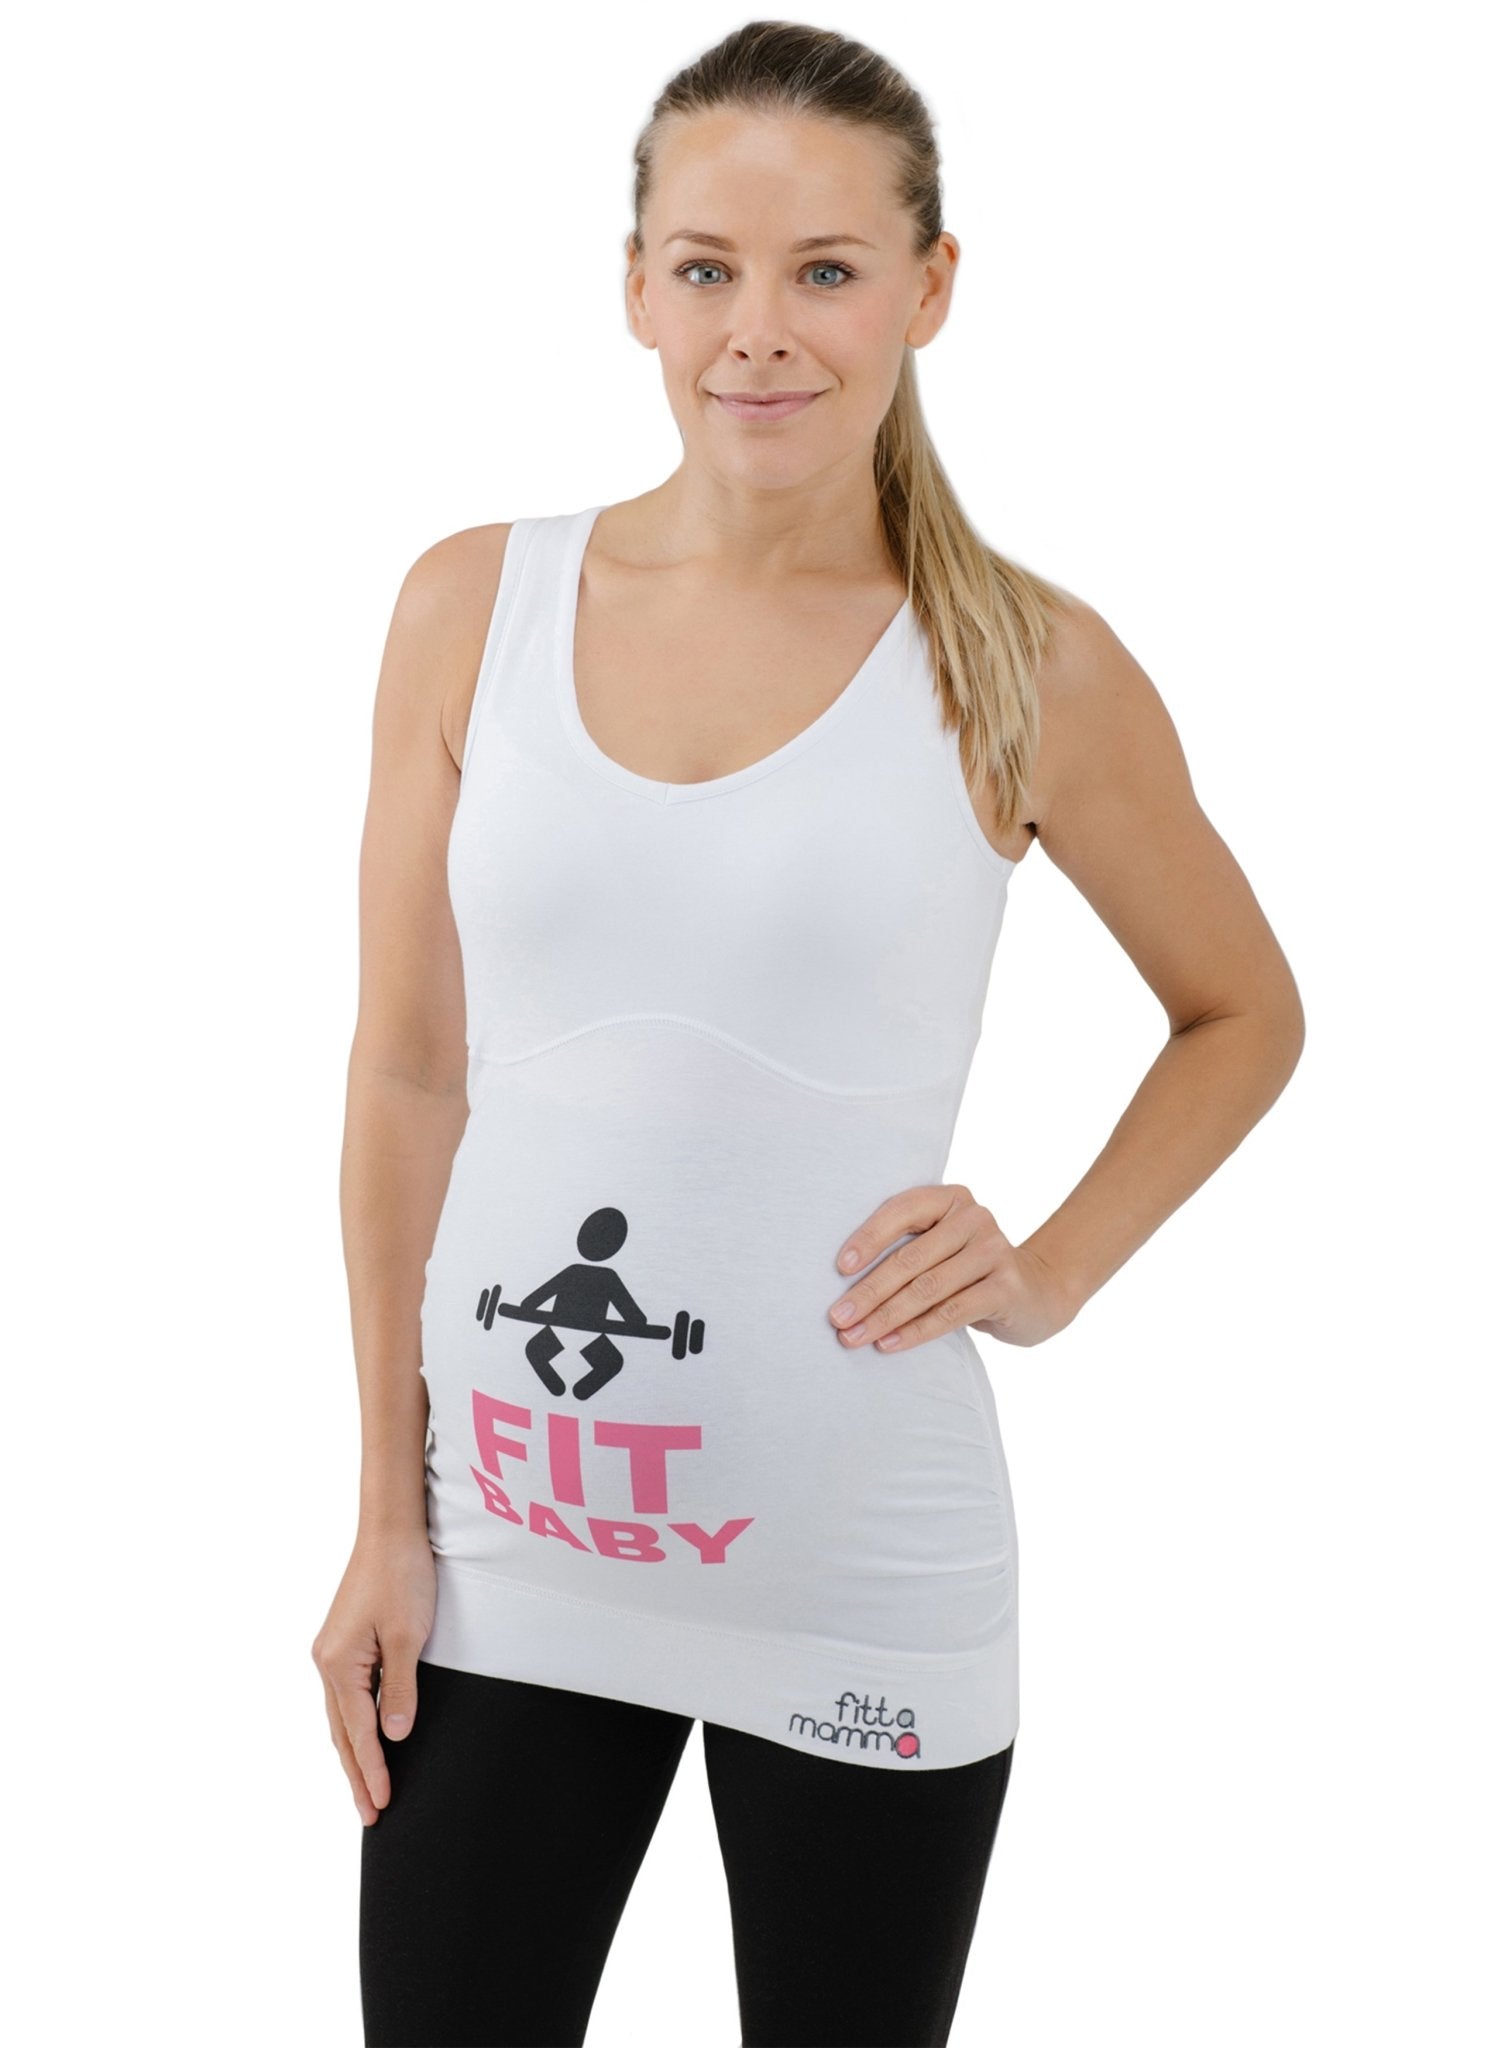 Fit Baby Maternity Workout Support Top – Mums and Bumps